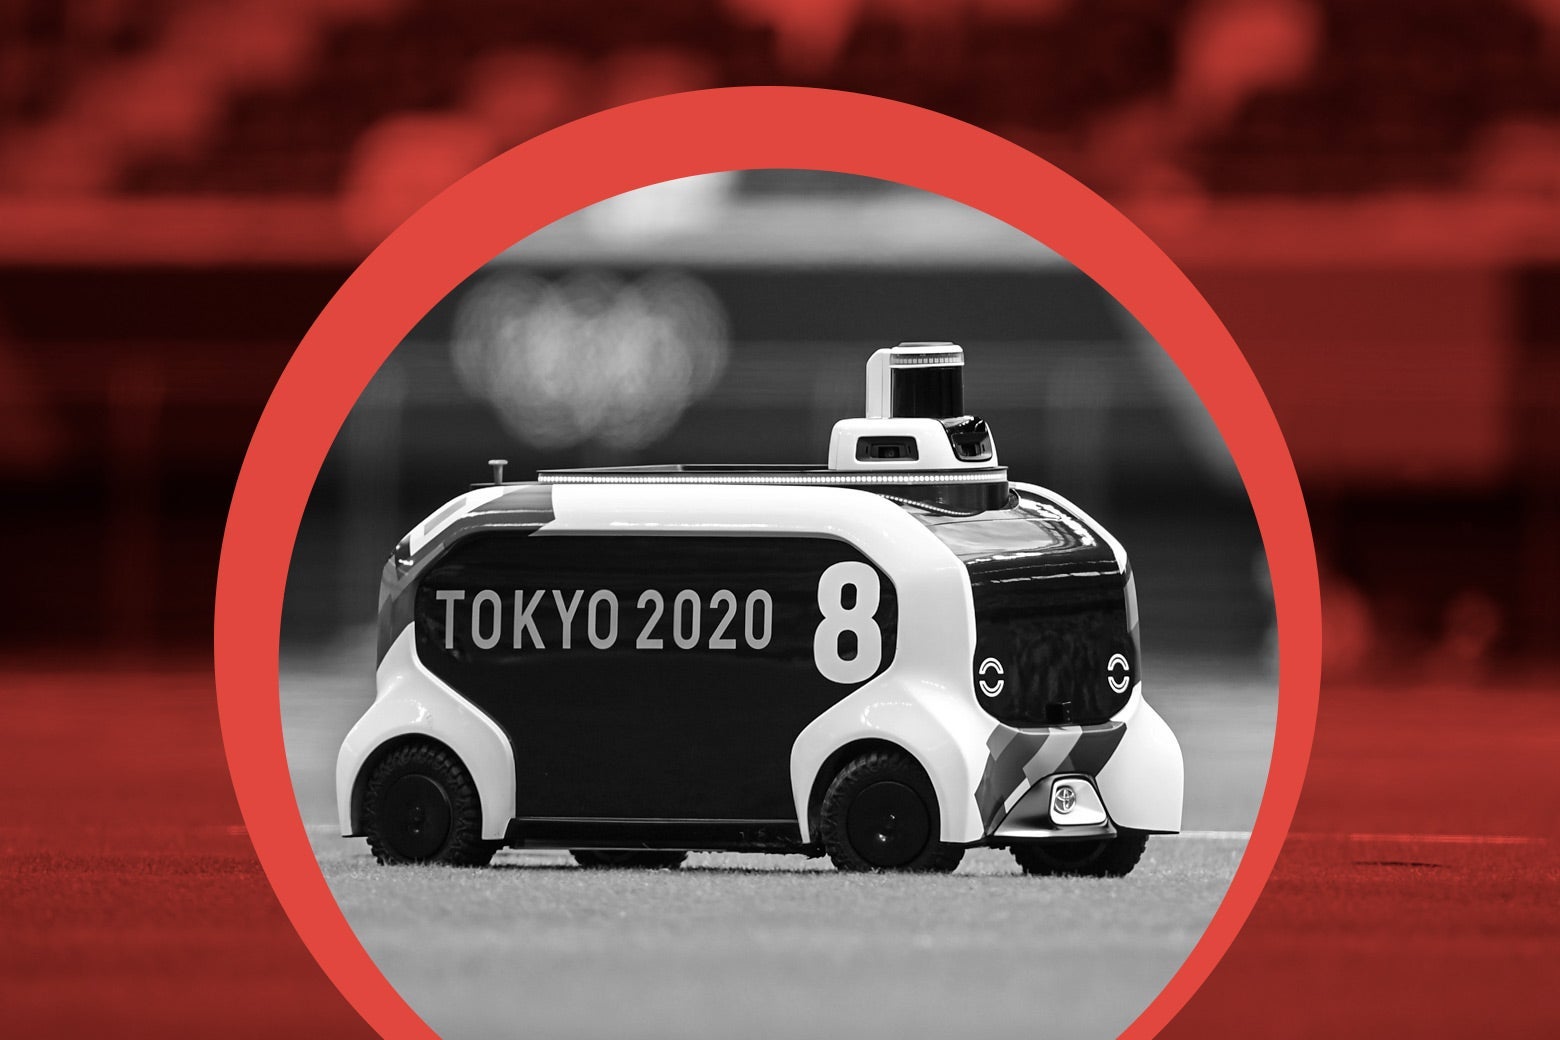 A robot shaped like a little bus with a squat cylinder on top at the front on a field, encircled by an illustration highlighting it 